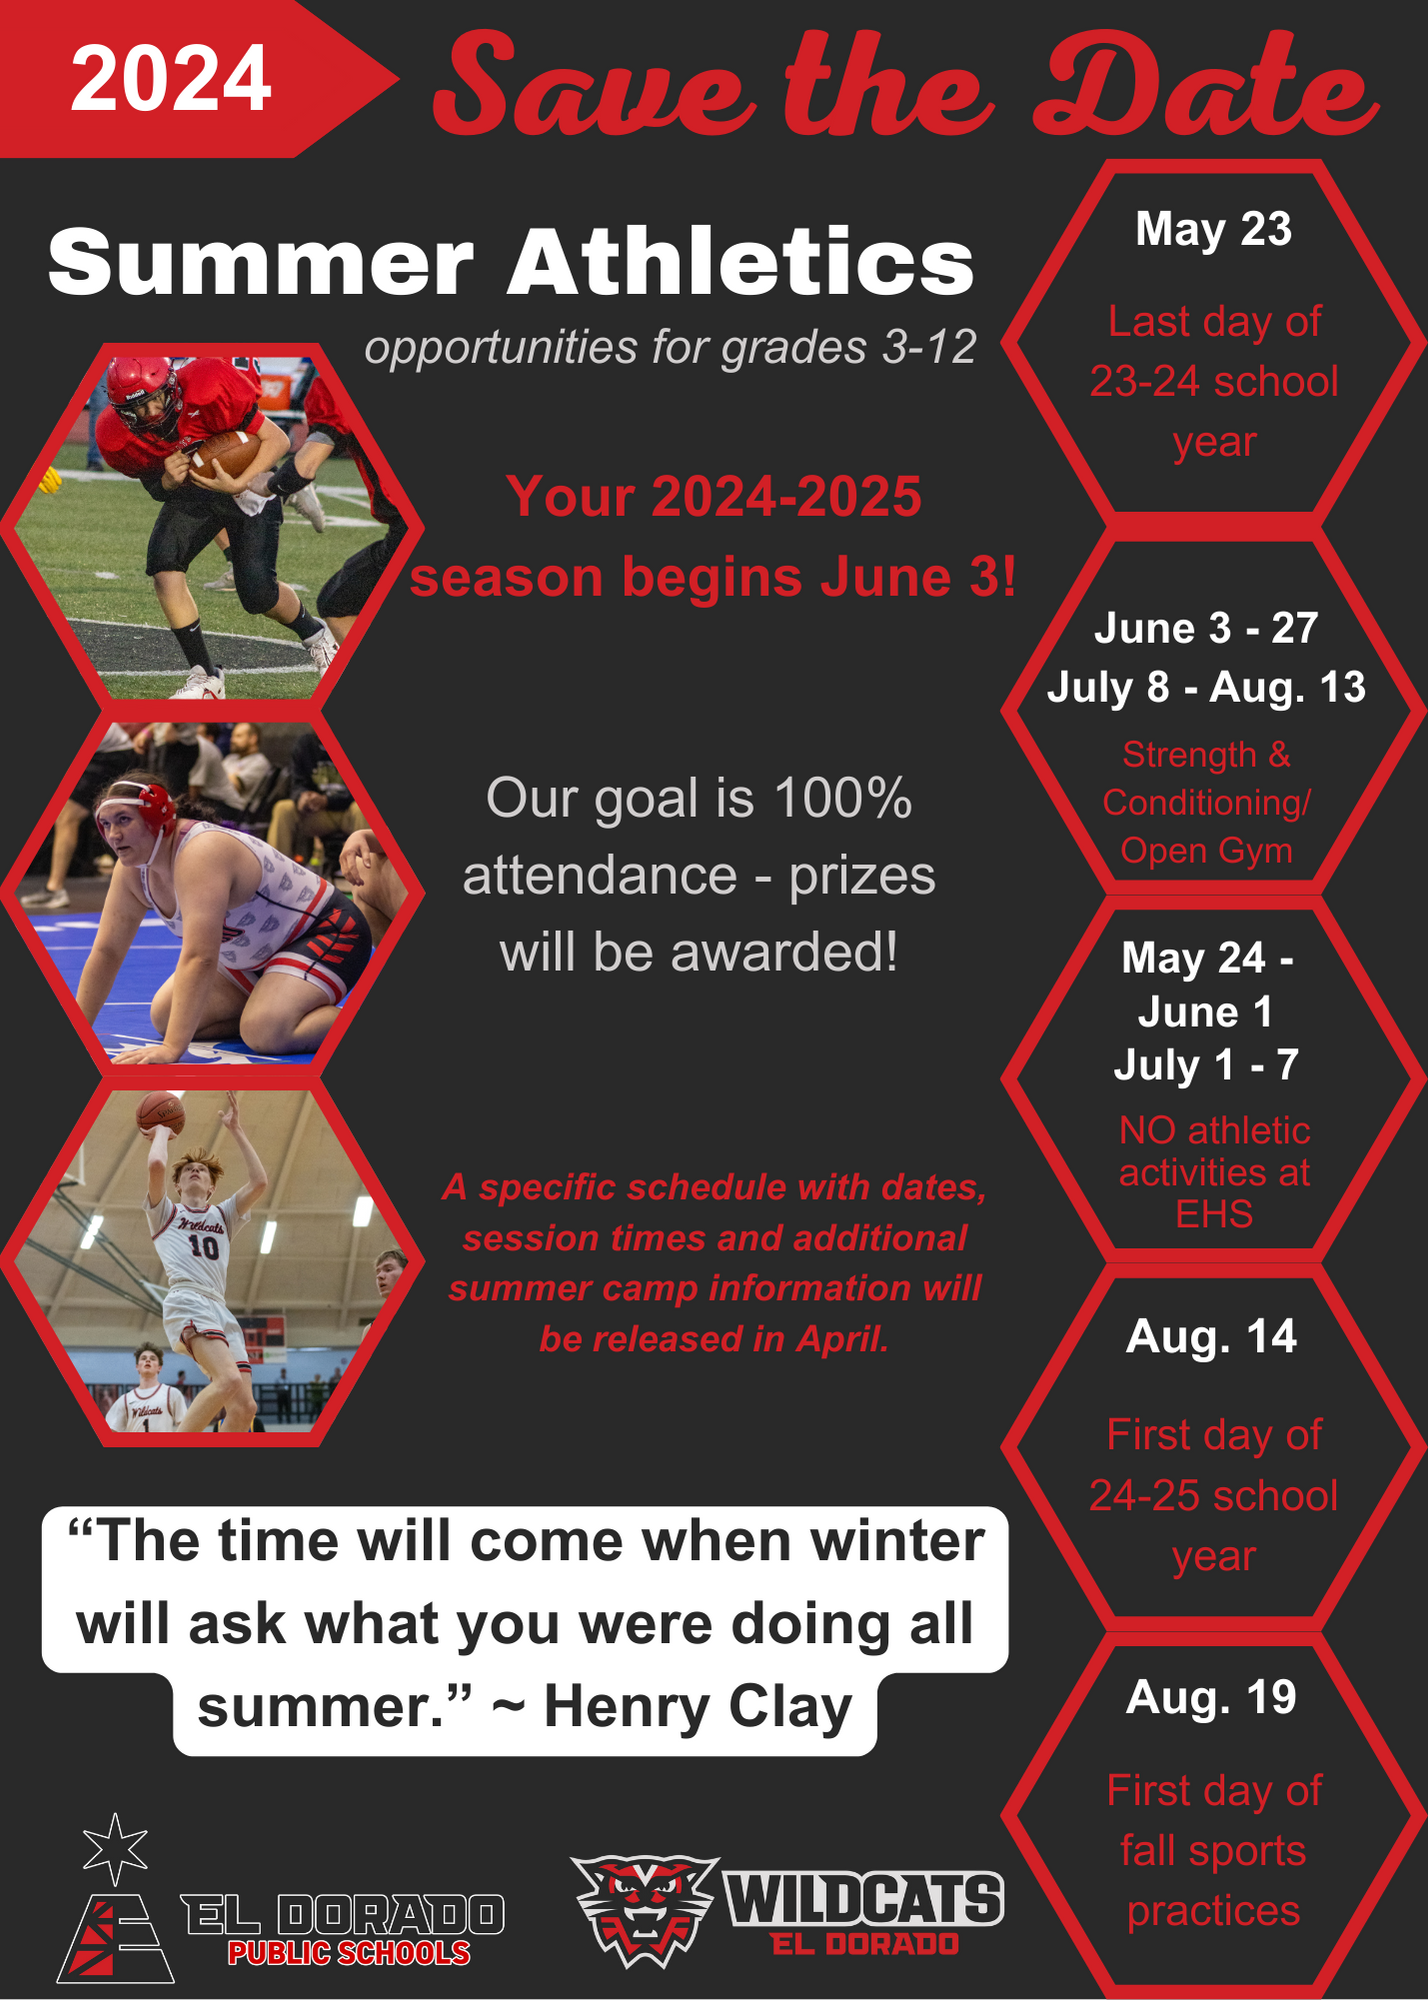 Save the Date for Summer Athletics